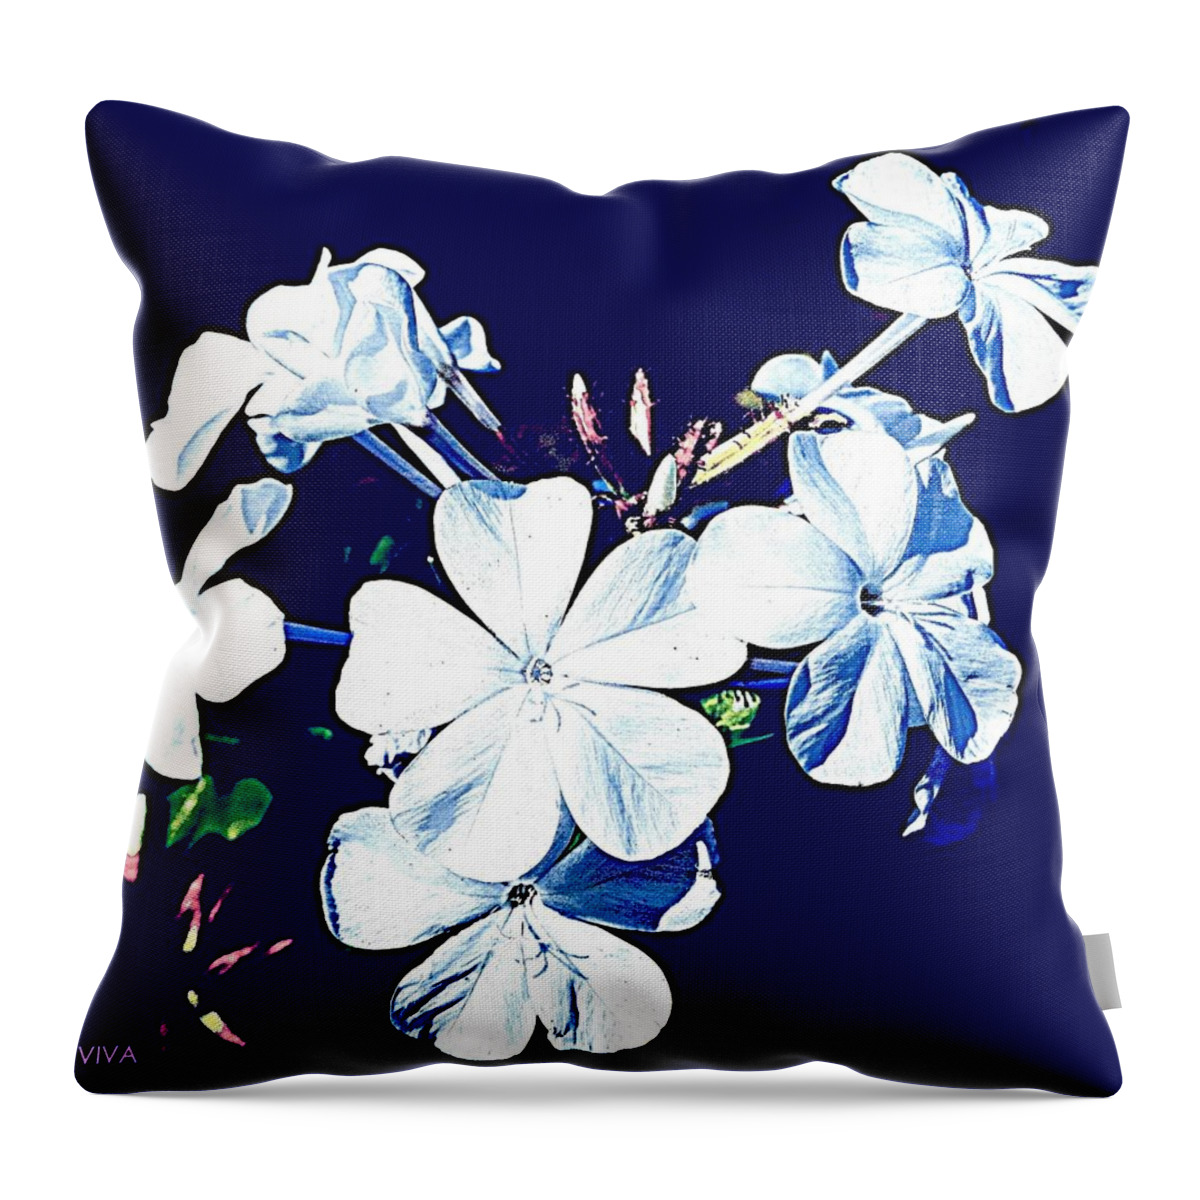 Plumbago Throw Pillow featuring the photograph Pretty White Plumbago On Blue by VIVA Anderson